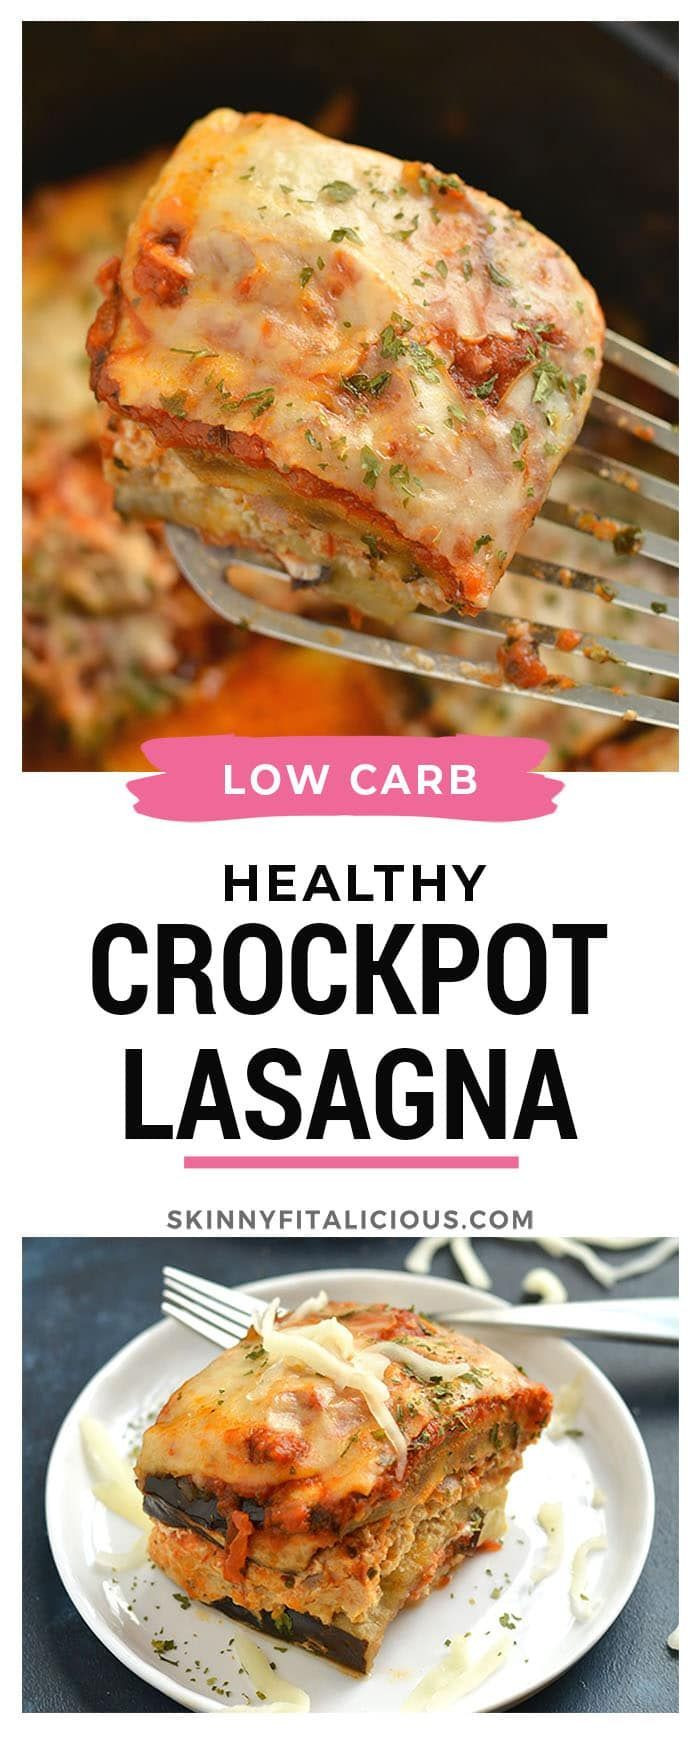 High Protein Low Carb Slow Cooker Recipes
 Low Carb Crockpot Lasagna Delicious high protein and